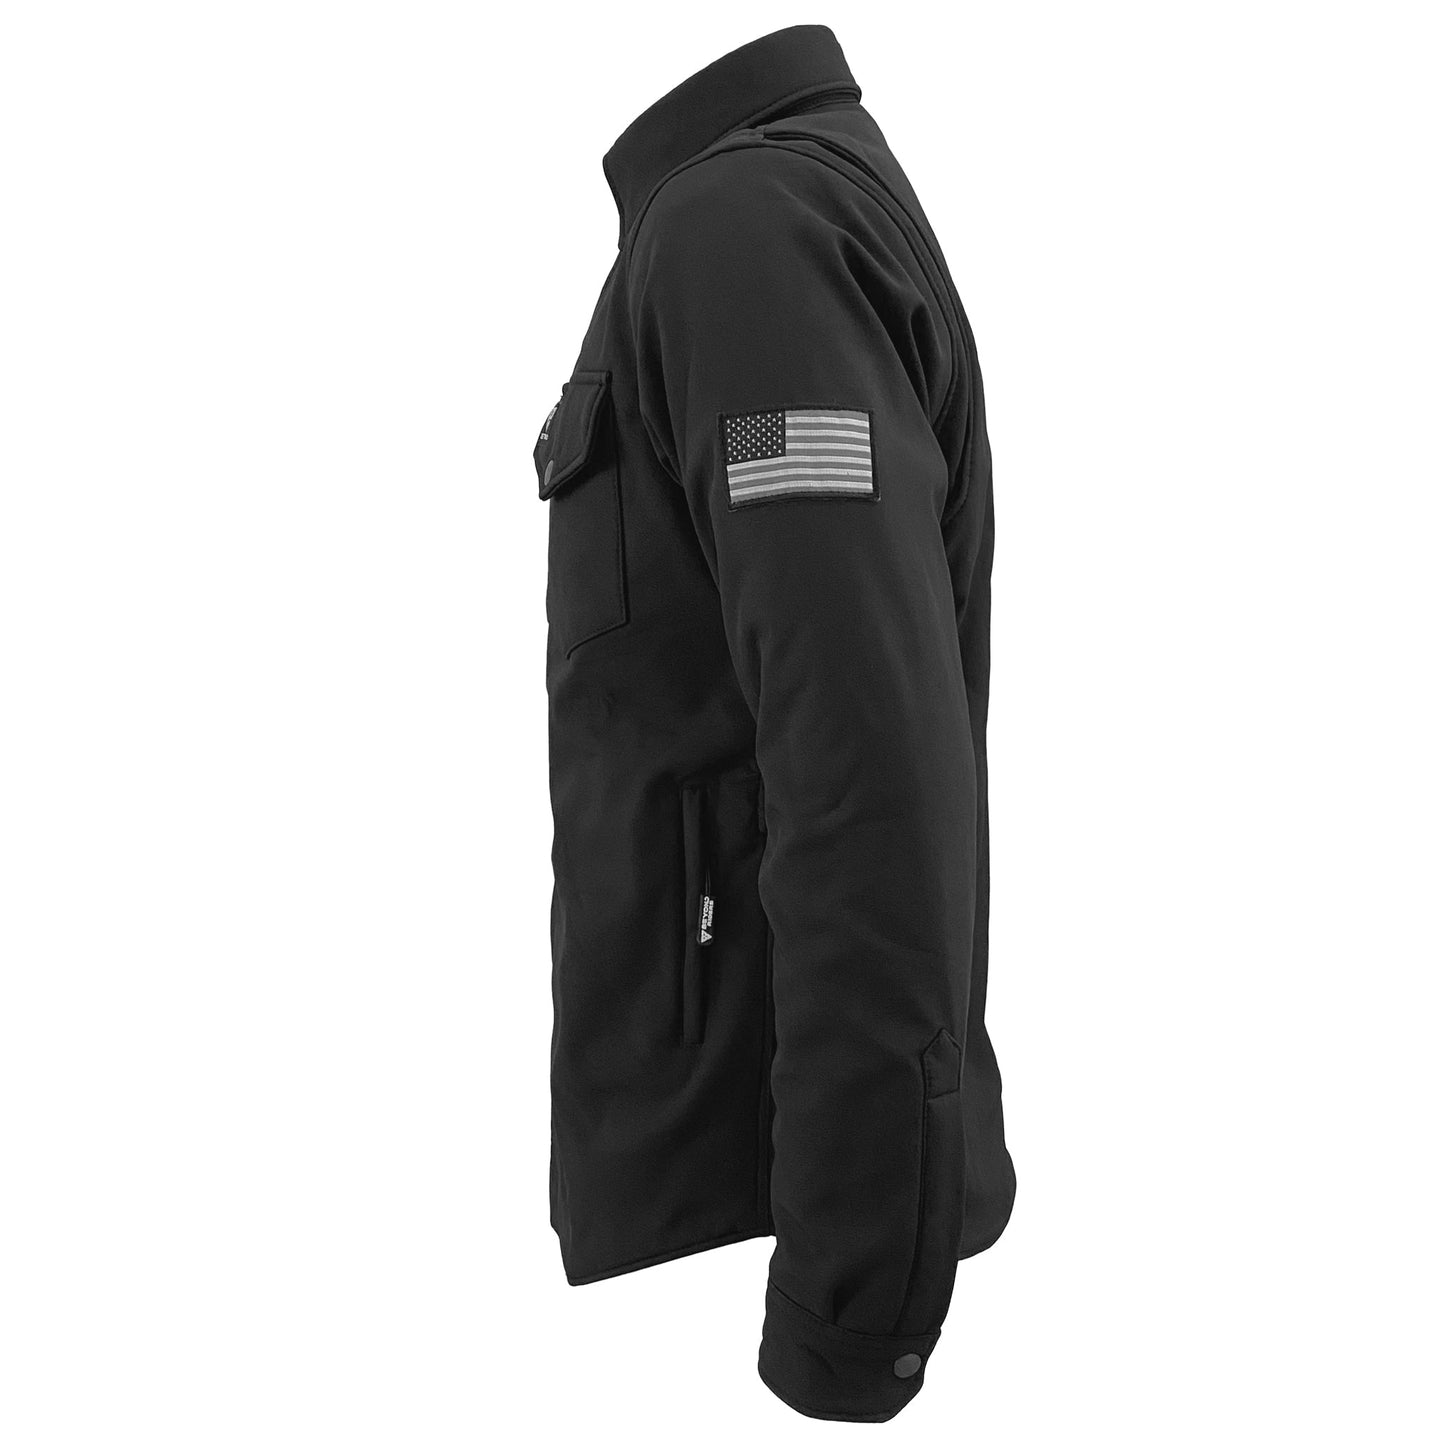 Protective SoftShell Winter Jacket for Men - Black Matte with Level 1 Pads